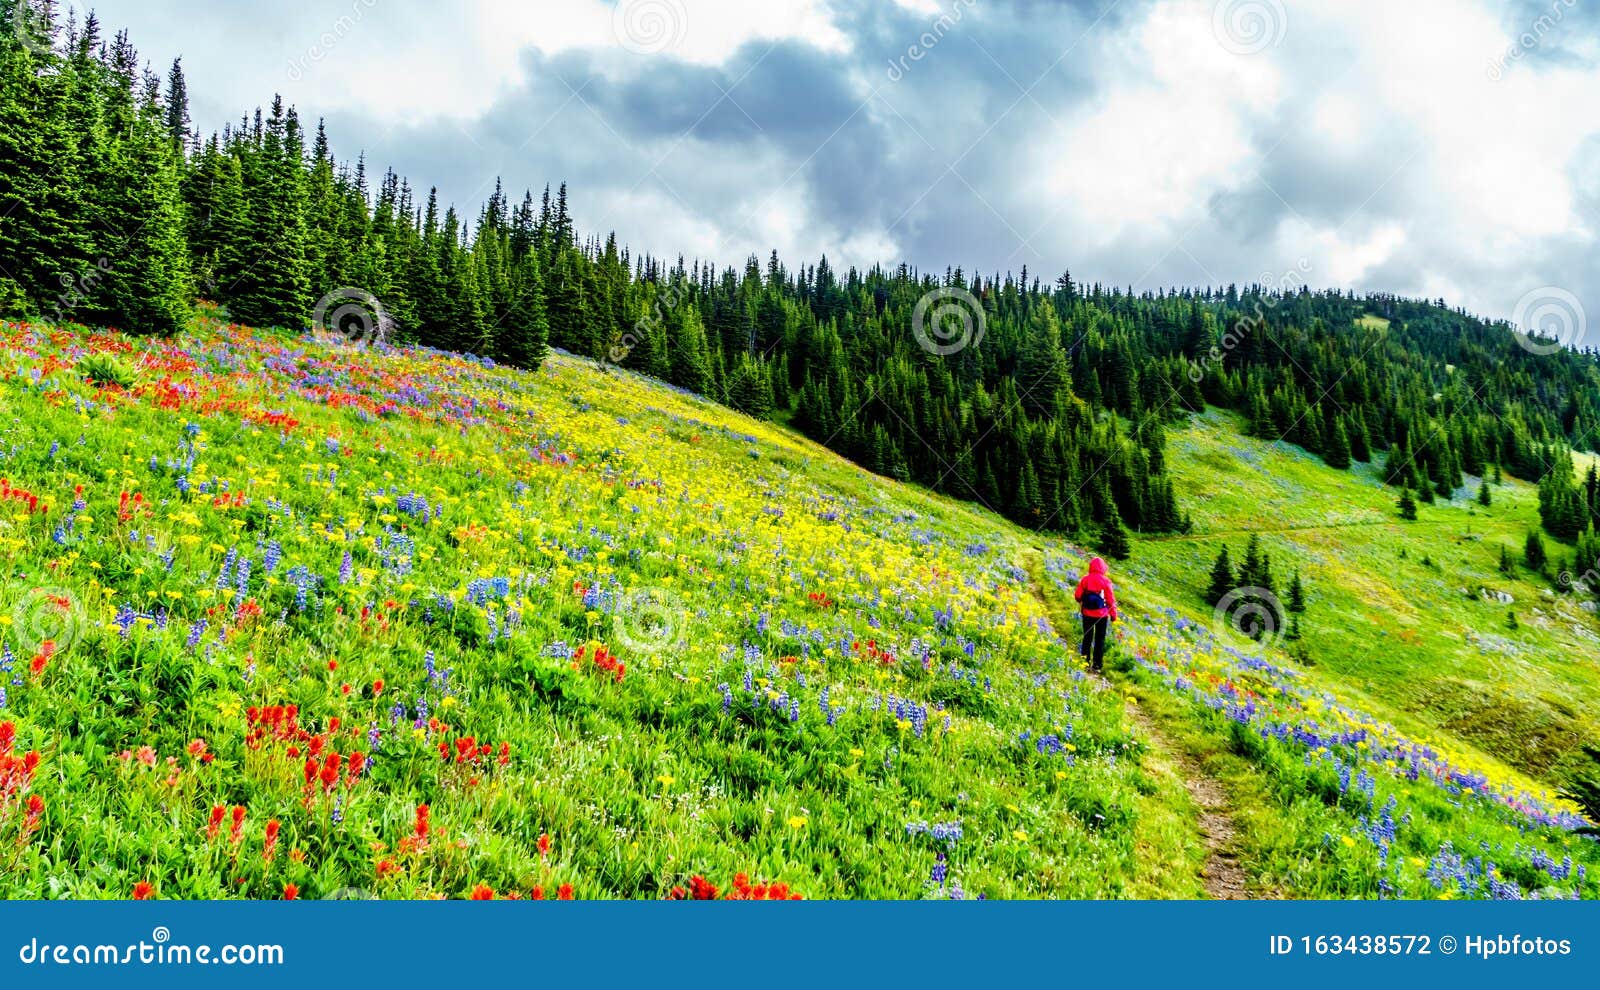 Alpine Meadows Filled With An Abundance Of Wildflowers In 